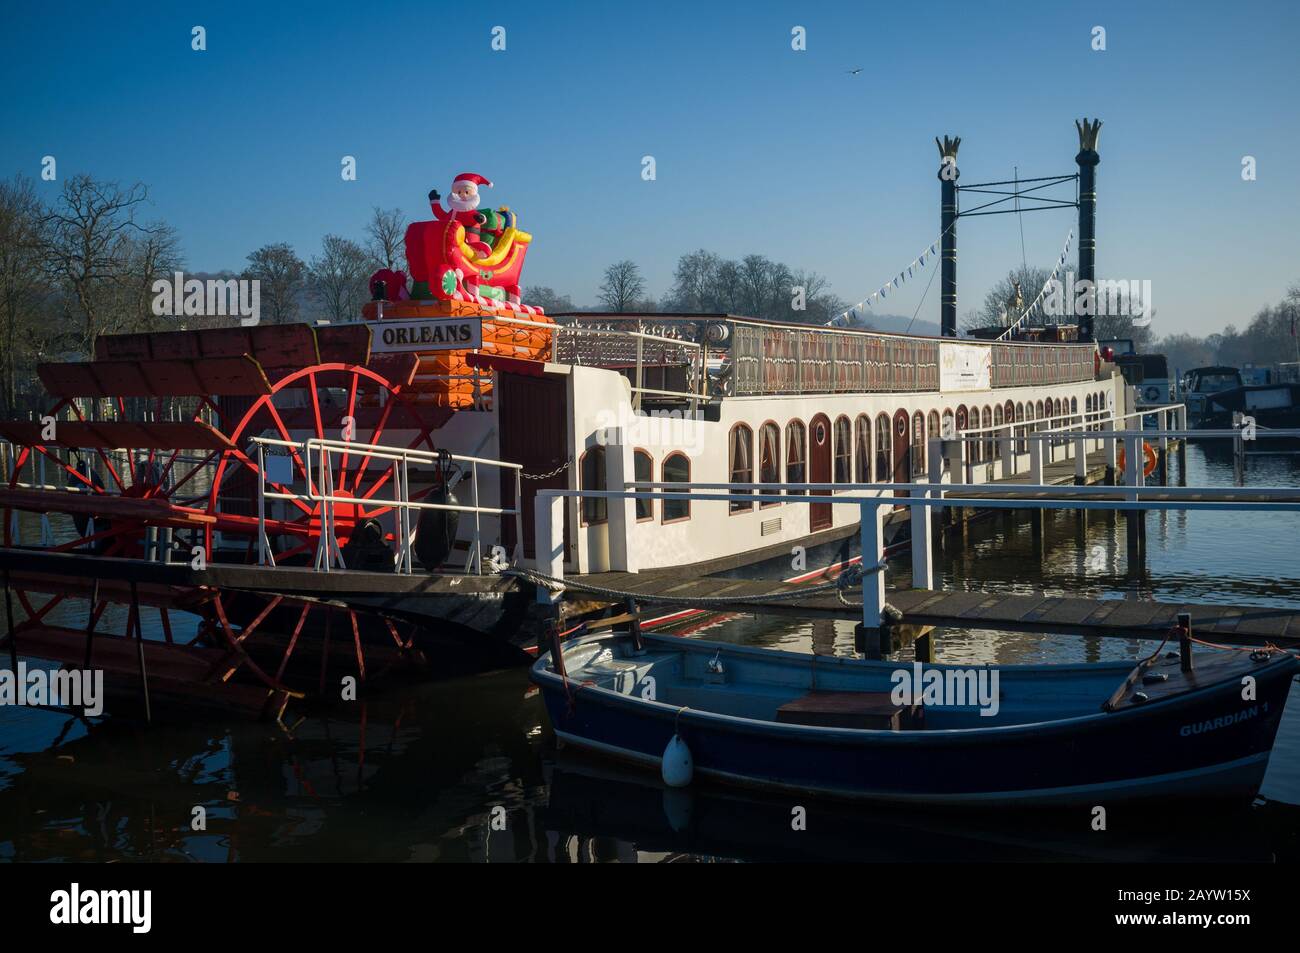 The pleasure cruiser 'New Orleans' moored by Hobbs boatyard at Christmas at Henley-on-Thames with an inflatable Santa Claus in a sleigh. Stock Photo